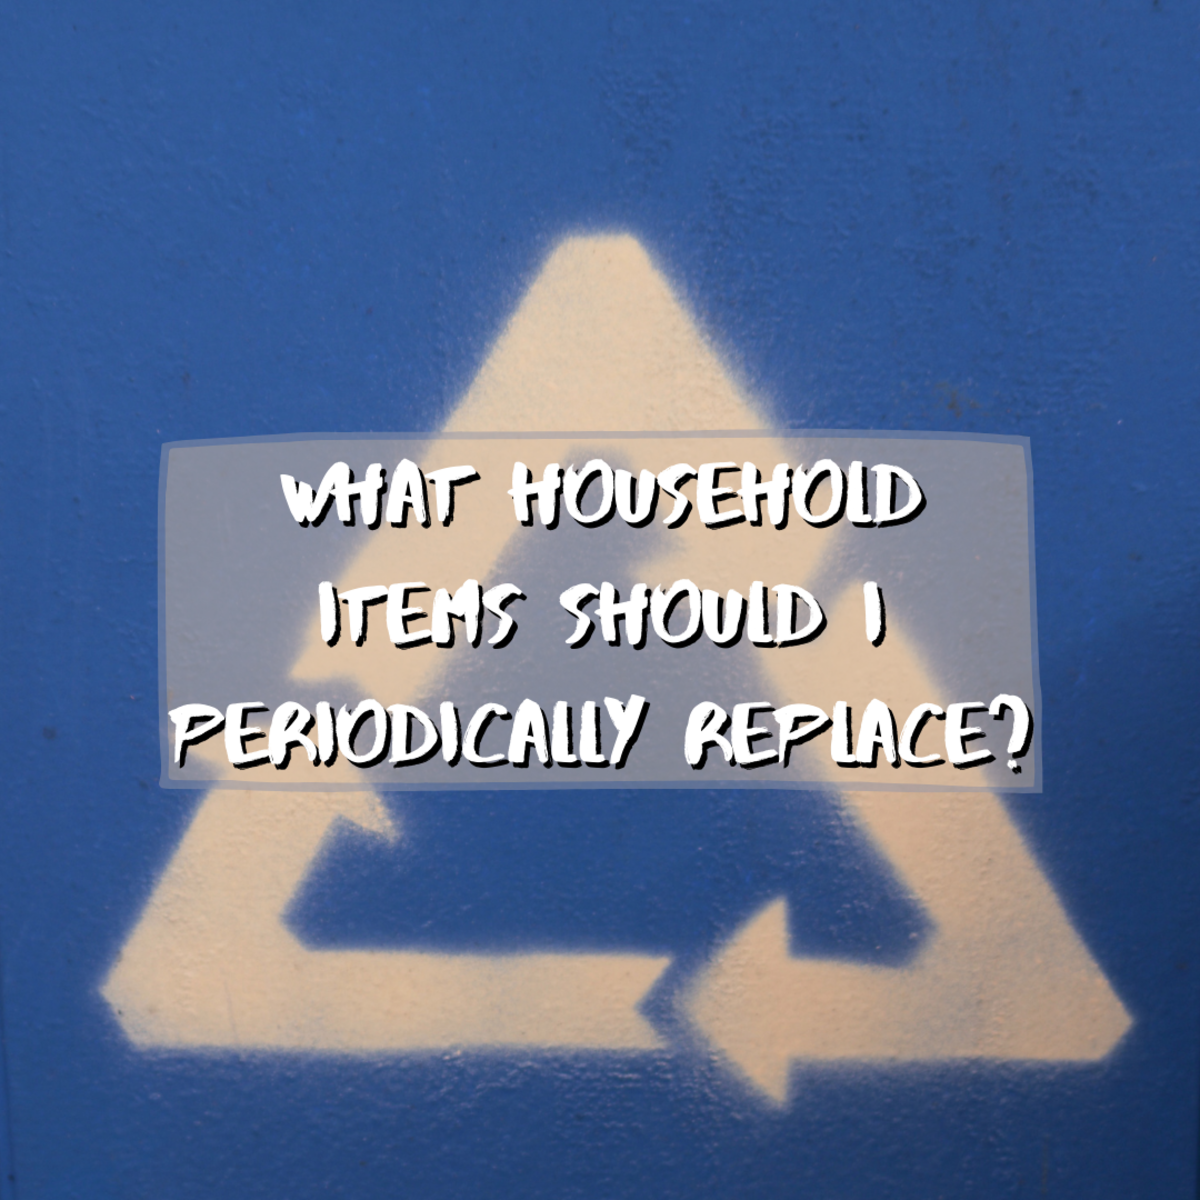 Read on to learn what 10 household items are important to periodically replace.